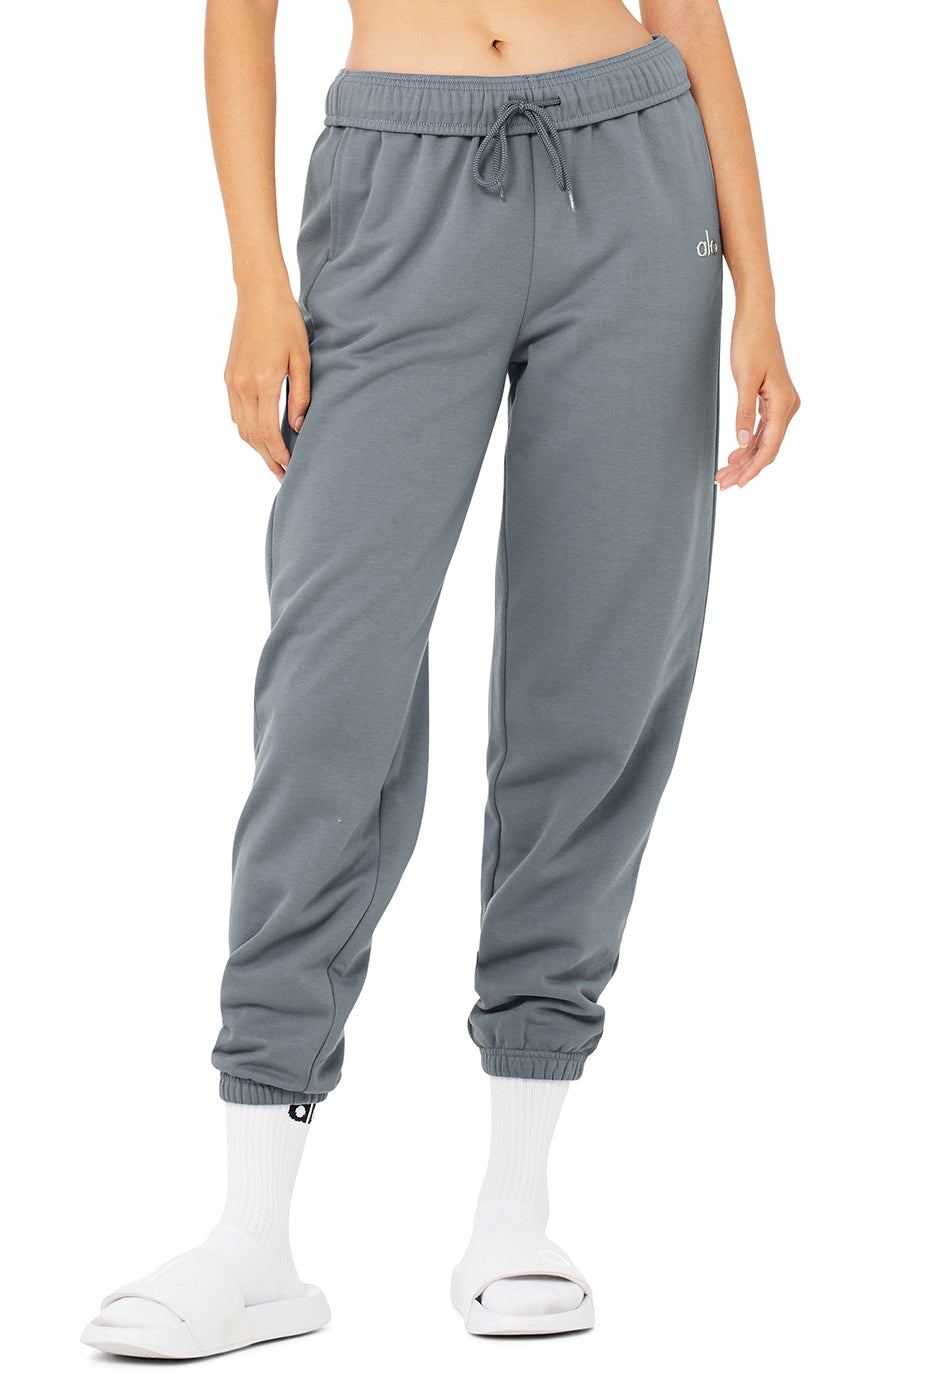 Accolade Sweatpant in Steel Blue by Alo Yoga - Work Well Daily